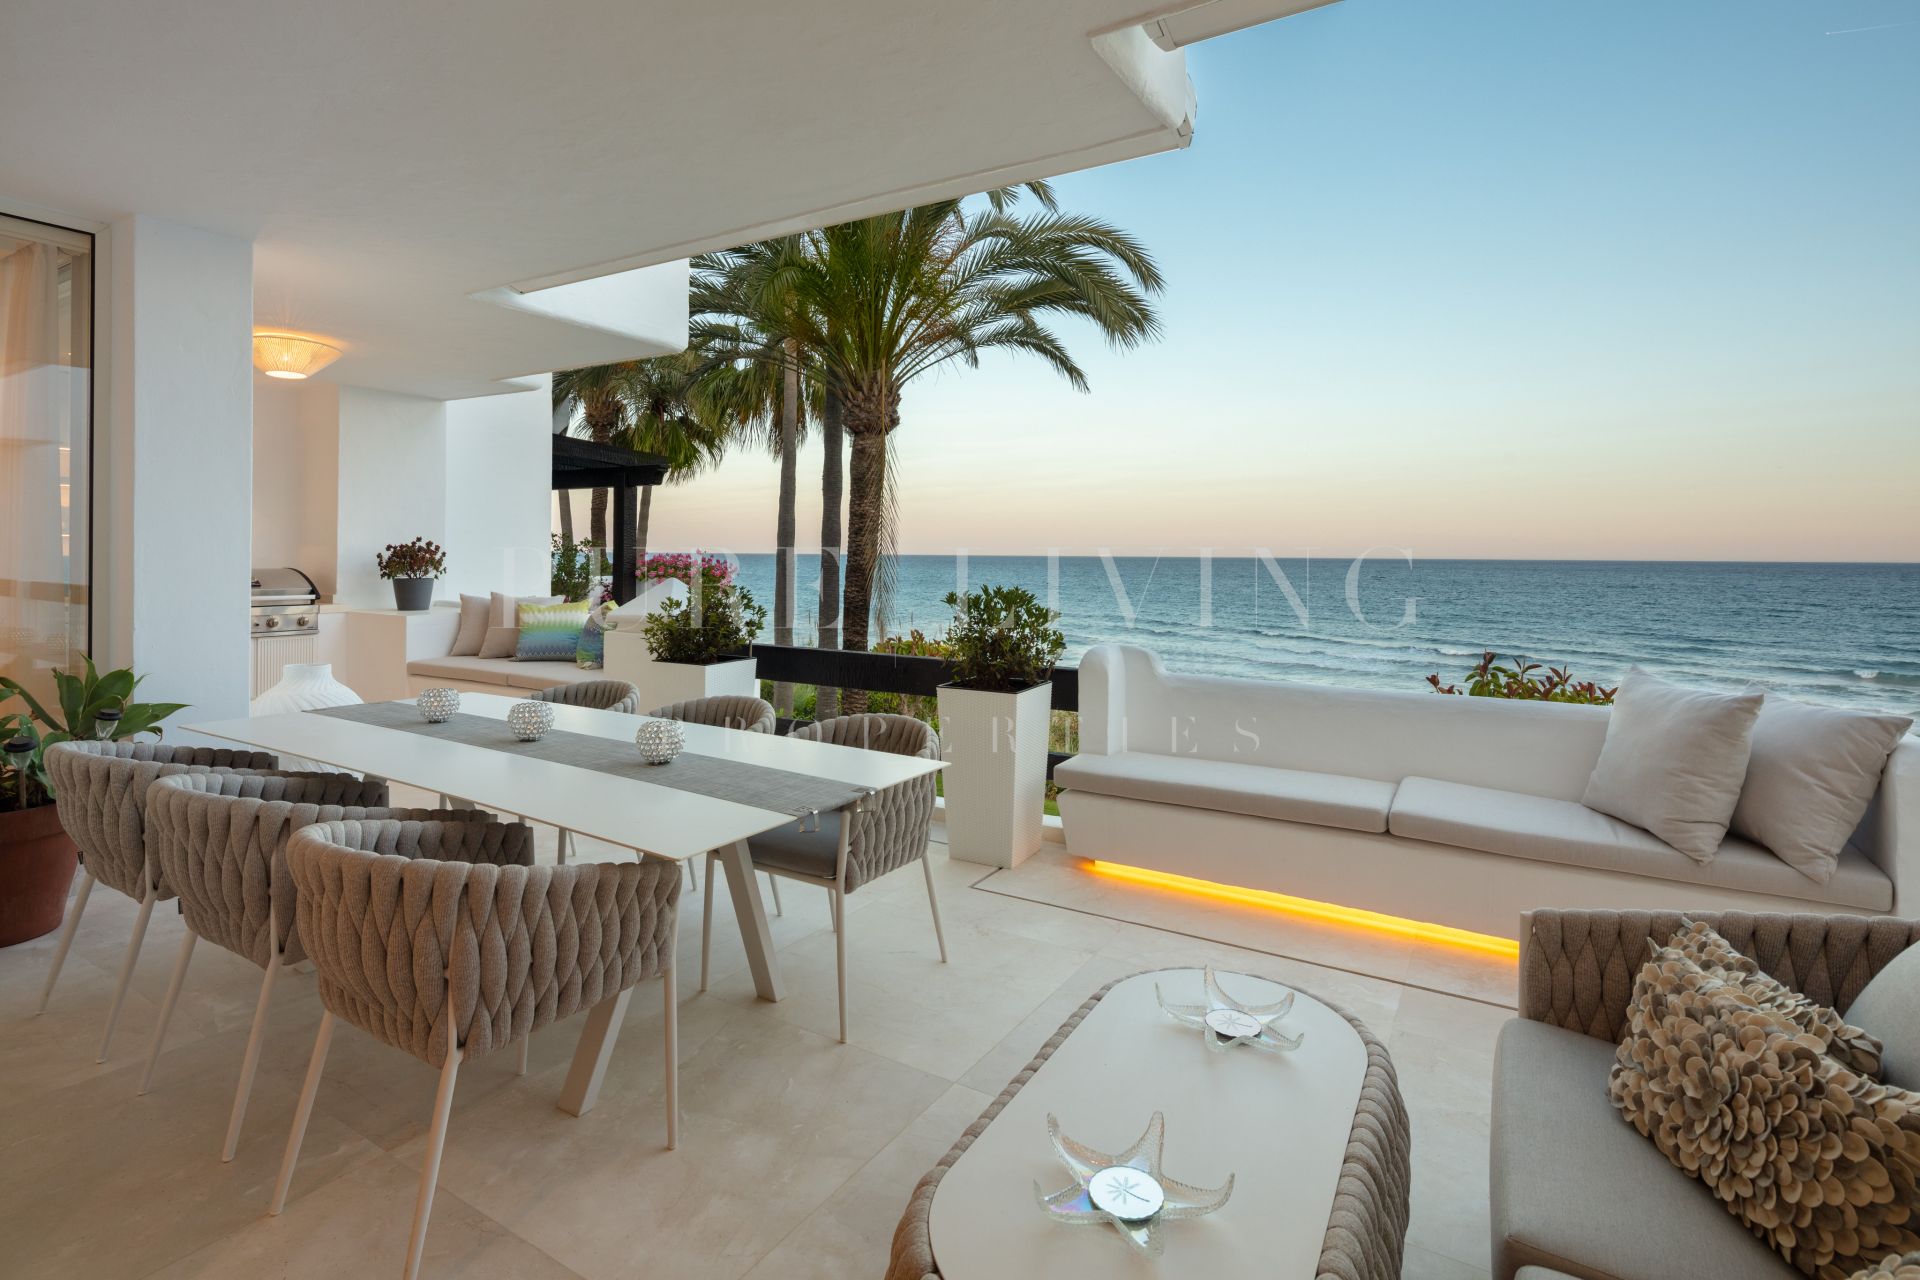 One-of-a-Kind Duplex Penthouse Frontline Beach in Marbella's renowned Puente Romano